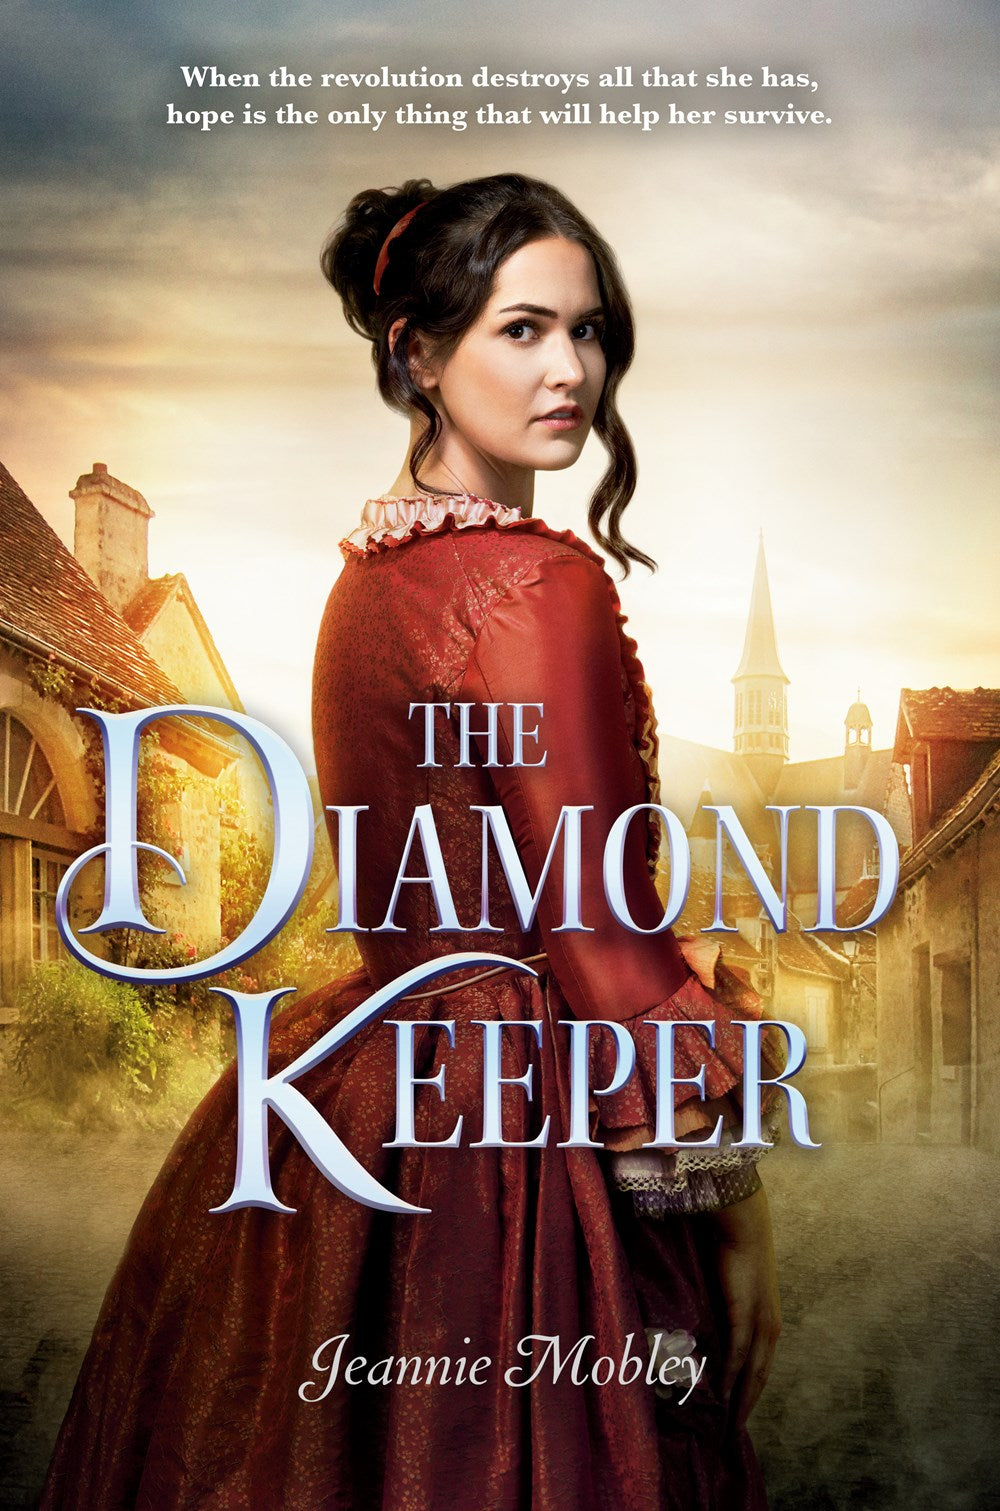 The Diamond Keeper by Jeannie Mobley (Hardcover, Signed)